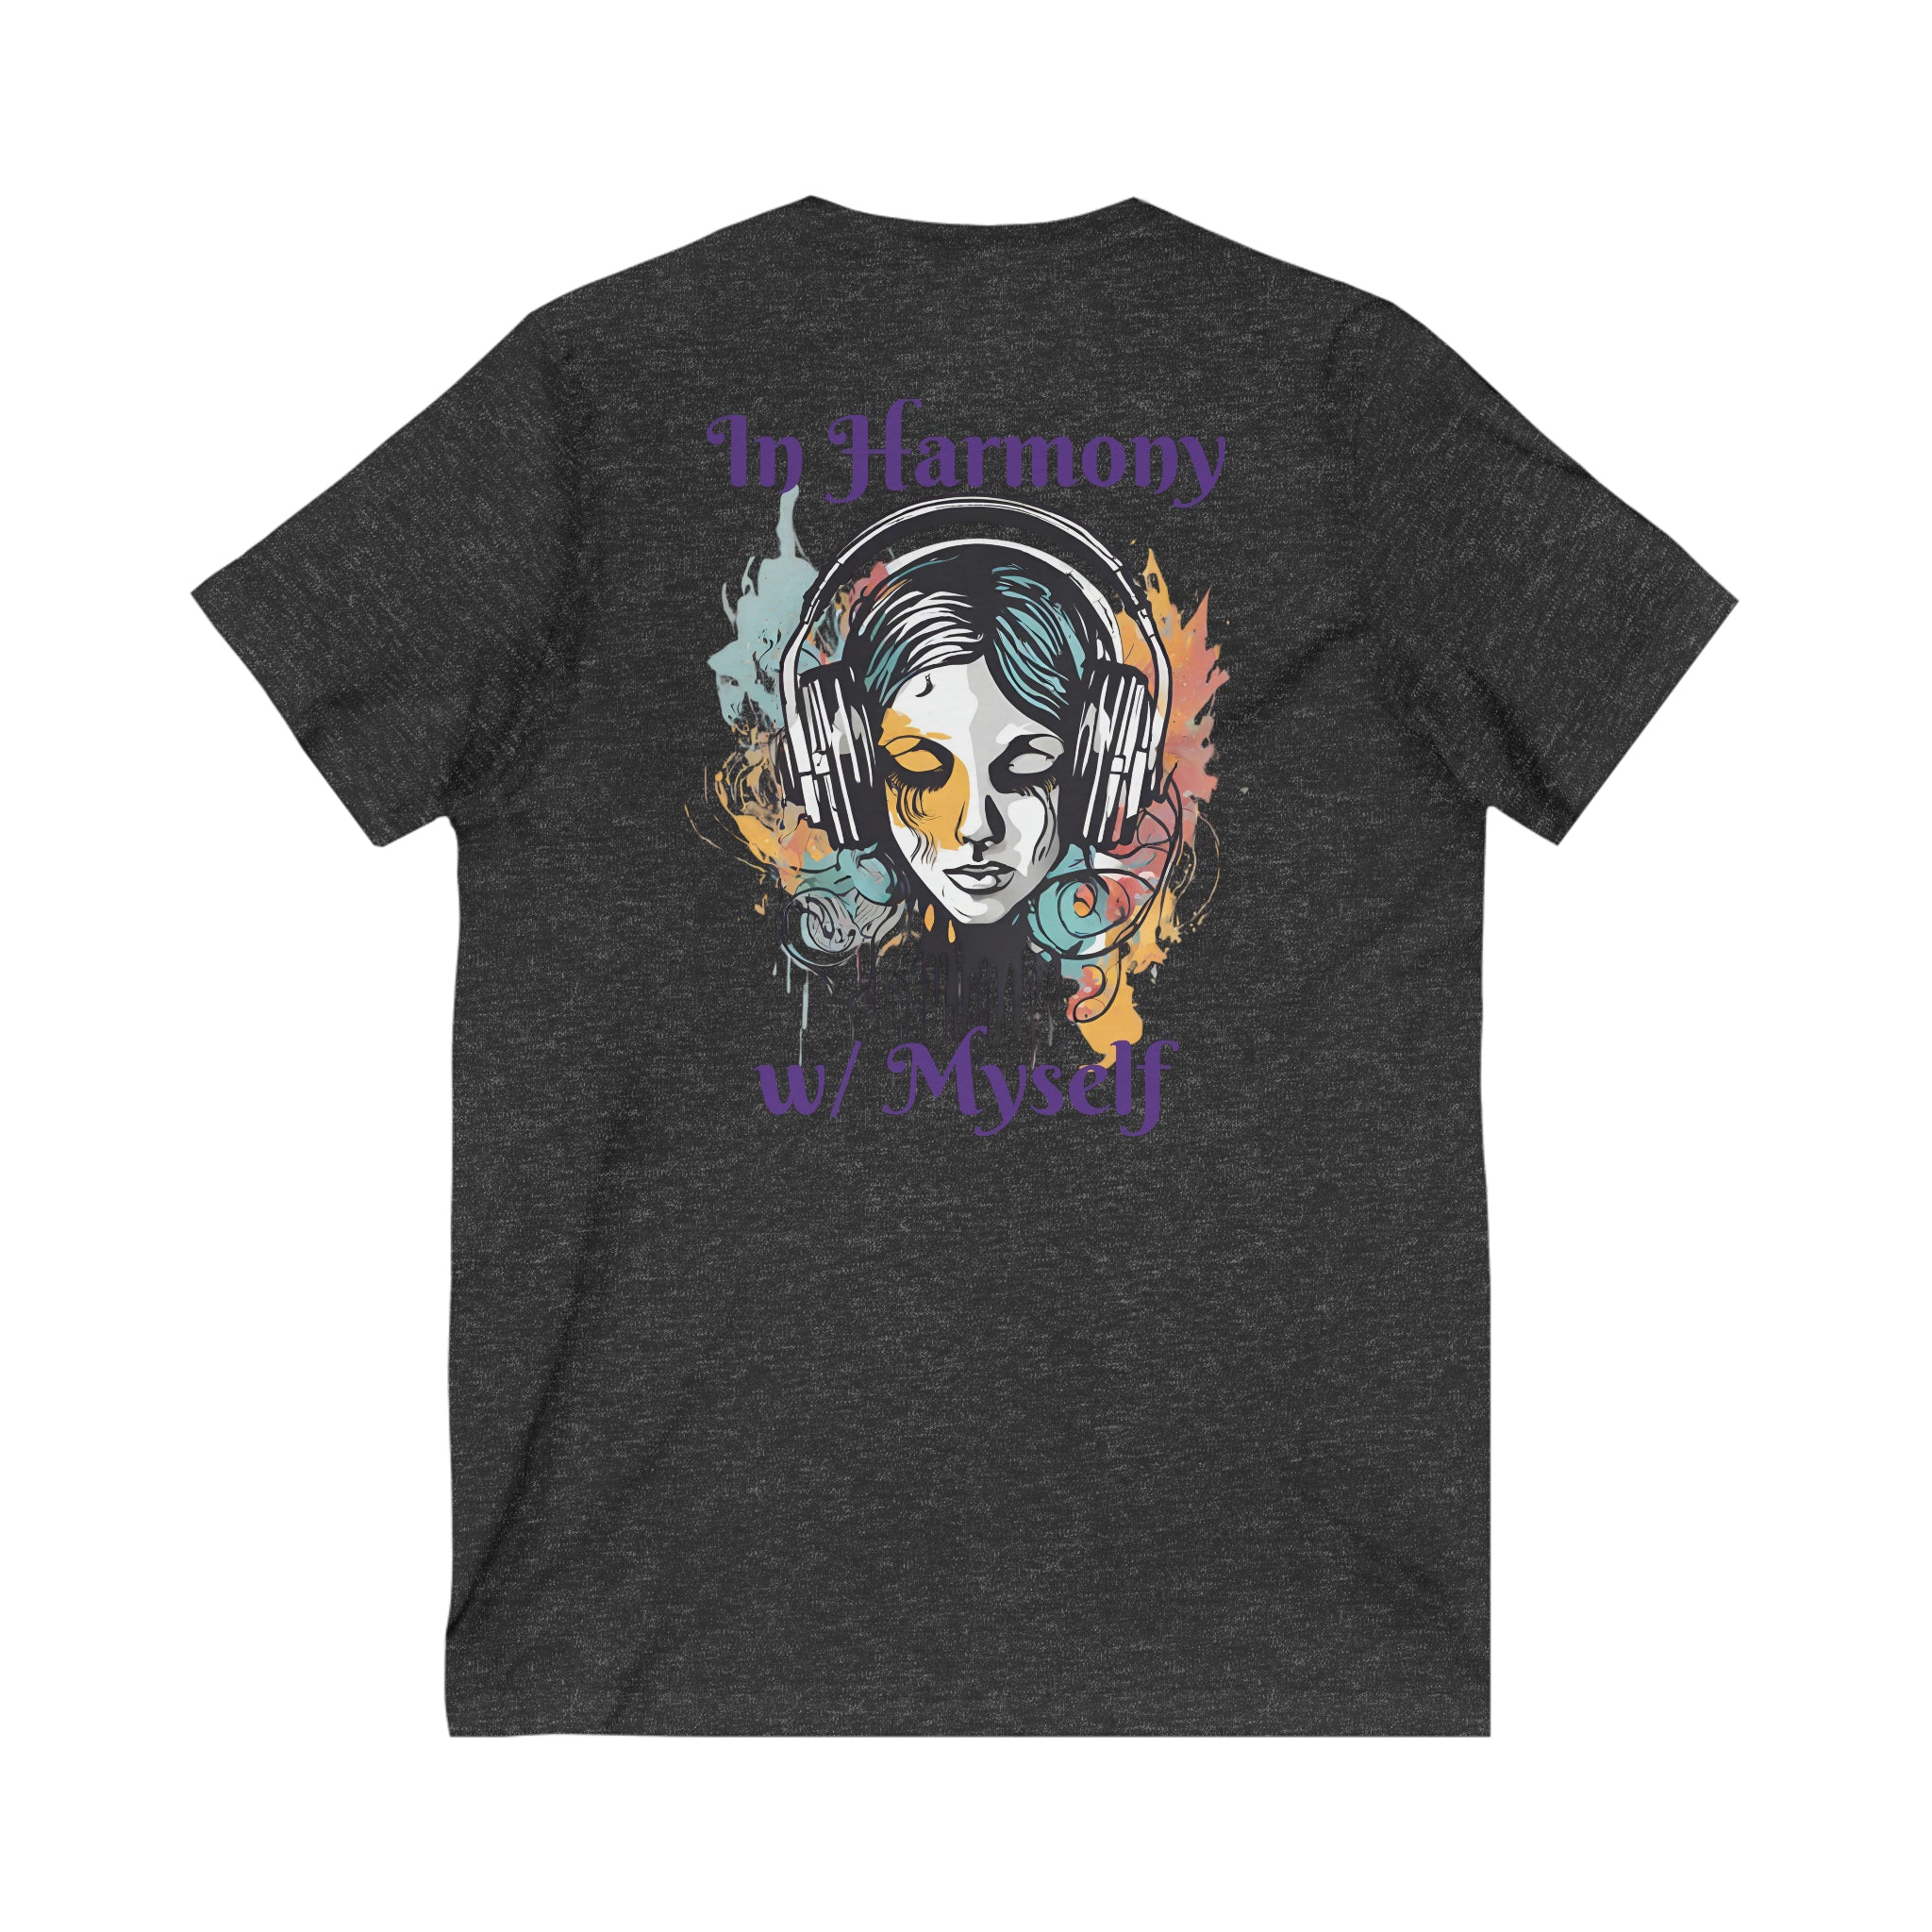 In Harmony w/ Myself Unisex Tee: Elevate awareness Dark Grey Heather Basic T-Shirt Casual Shirt Classic Tee Comfortable Tee Cotton T-Shirt Everyday Wear Graphic Tee Statement Shirt T-shirt Tee Collection Tee for all Tee for Men Tee for Women Unisex Apparel Vintage Tee V-neck 4733879647659892341_2048_52227275-8e93-406d-b584-a76923510416 Printify